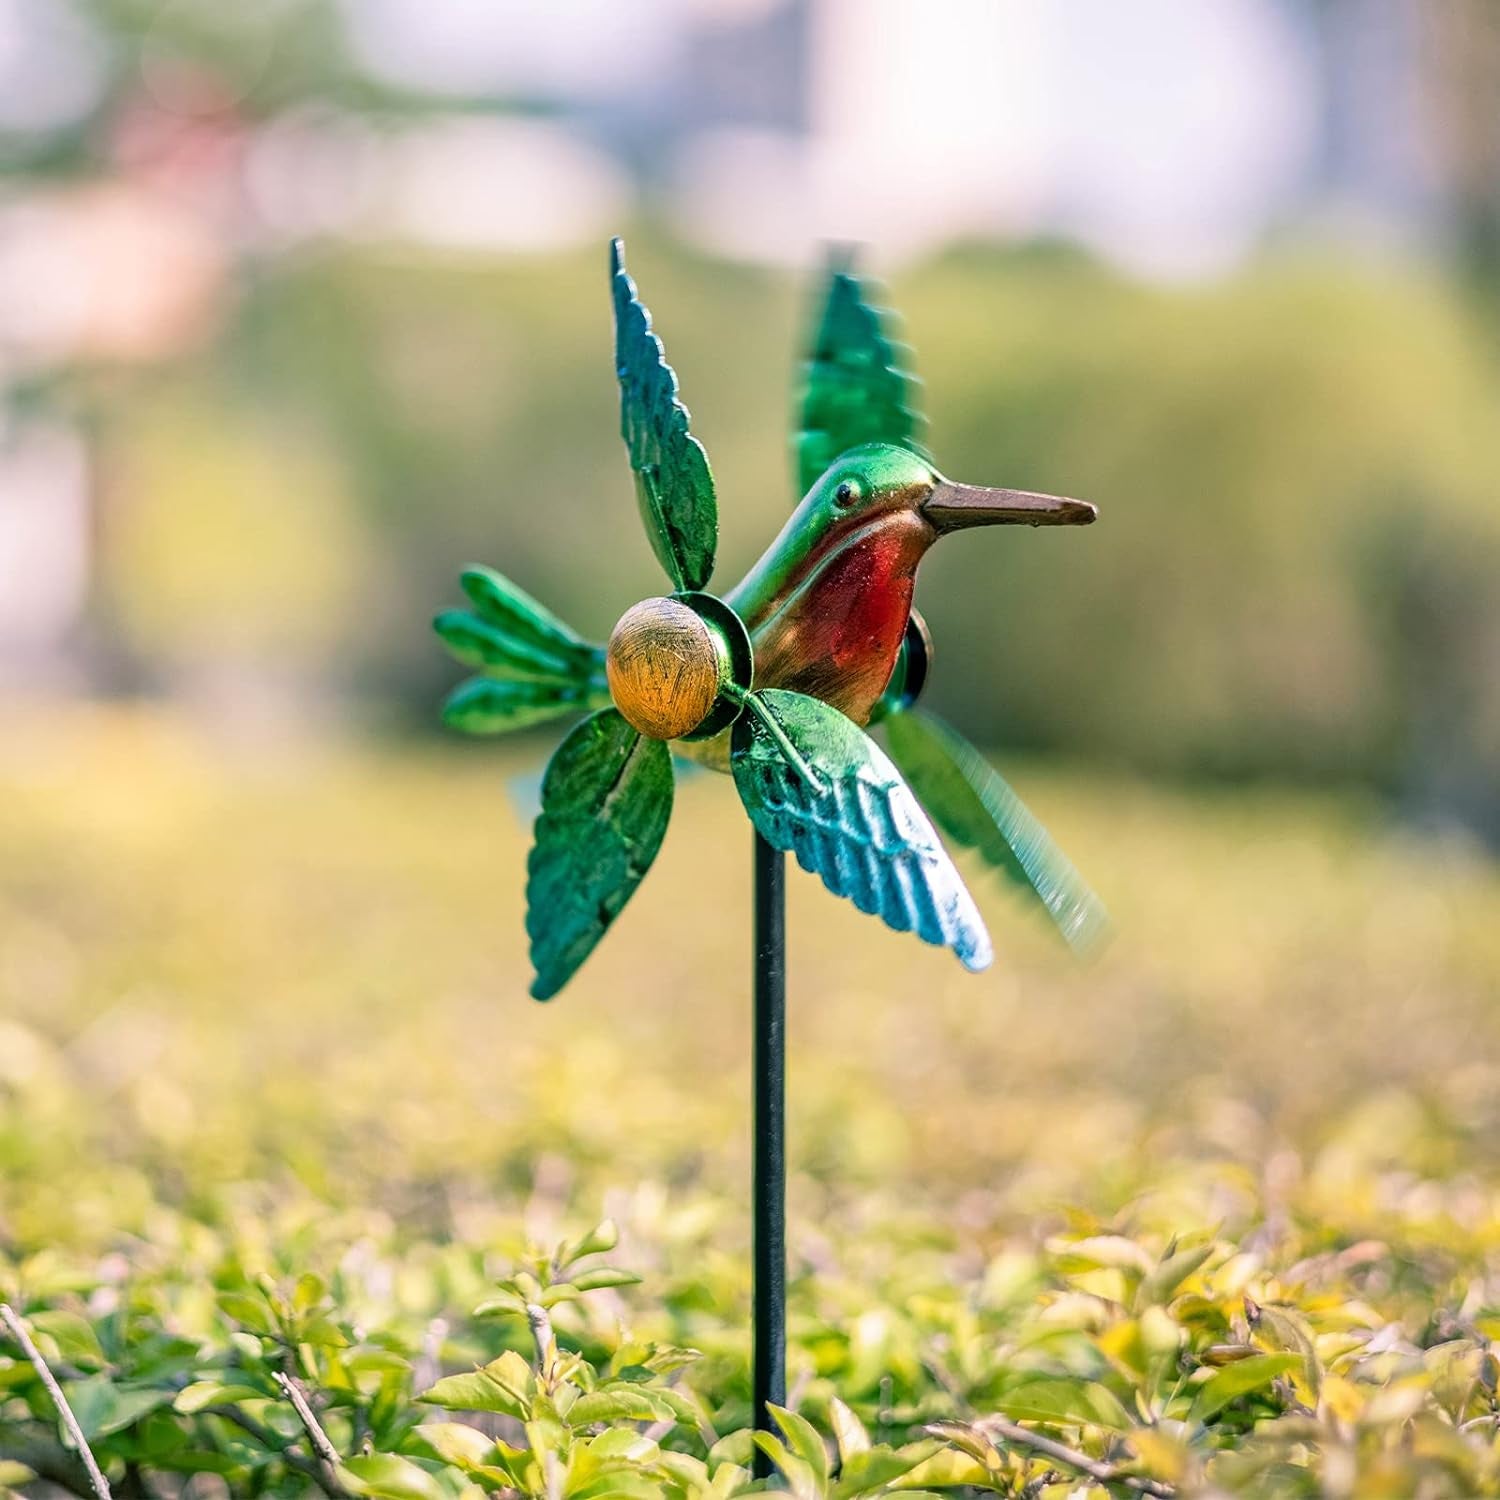 Wind Spinner Yard Spinners Hummingbird Small Wind Sculpture Metal Windmill 2 Pack for Outdoor Yard Patio Lawn & Garden